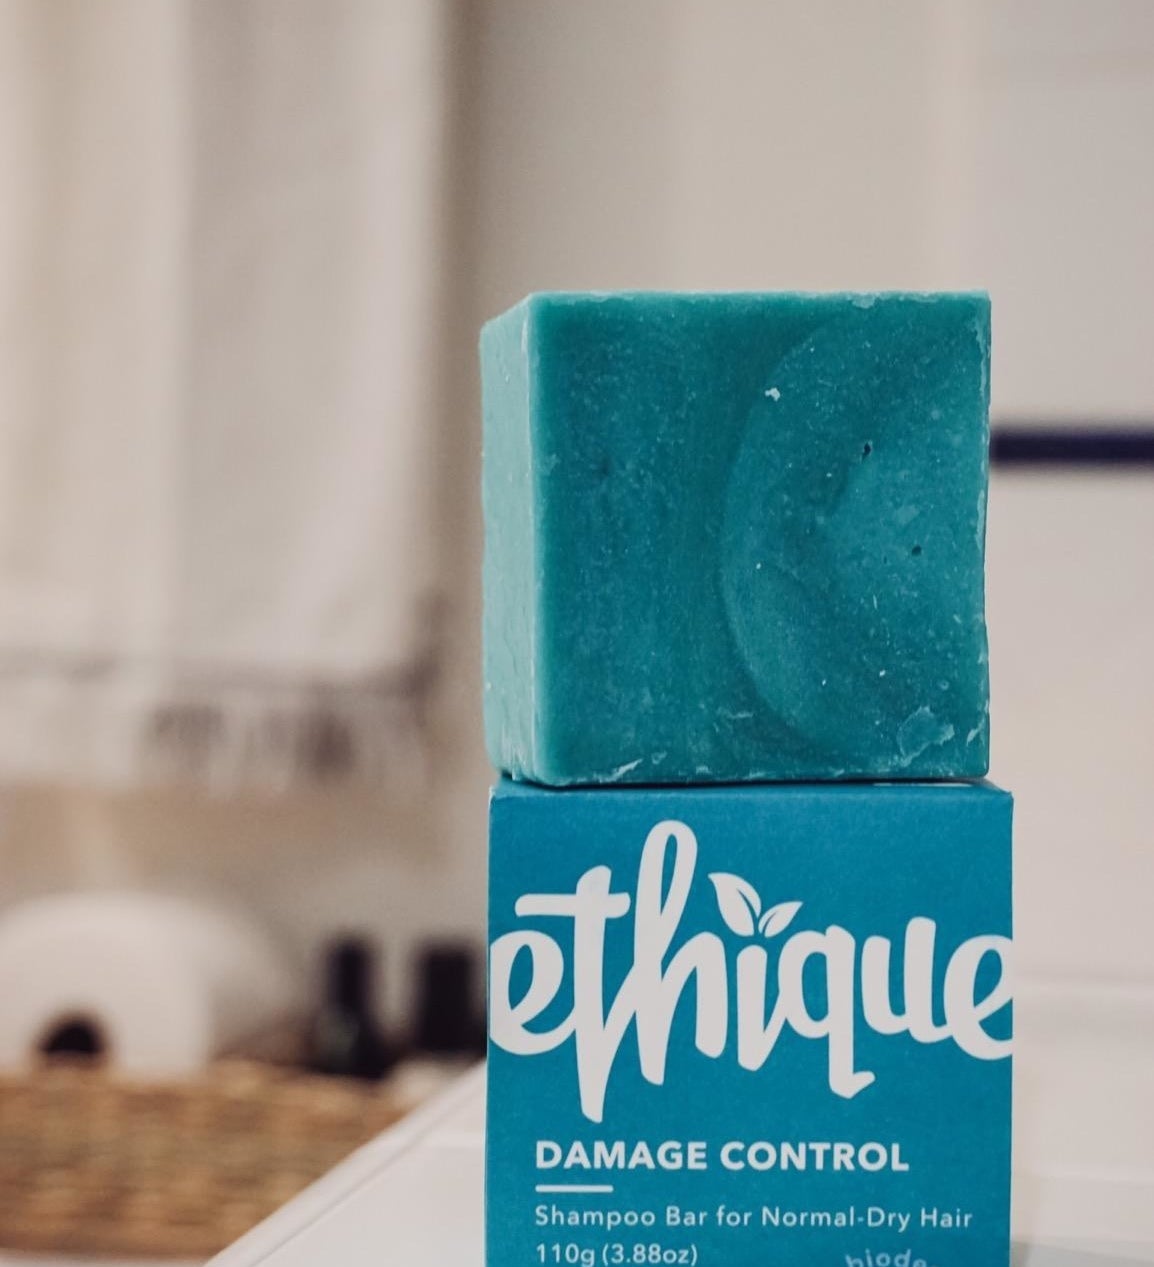 Reviewer image of the blue shampoo bar on top of the packaging